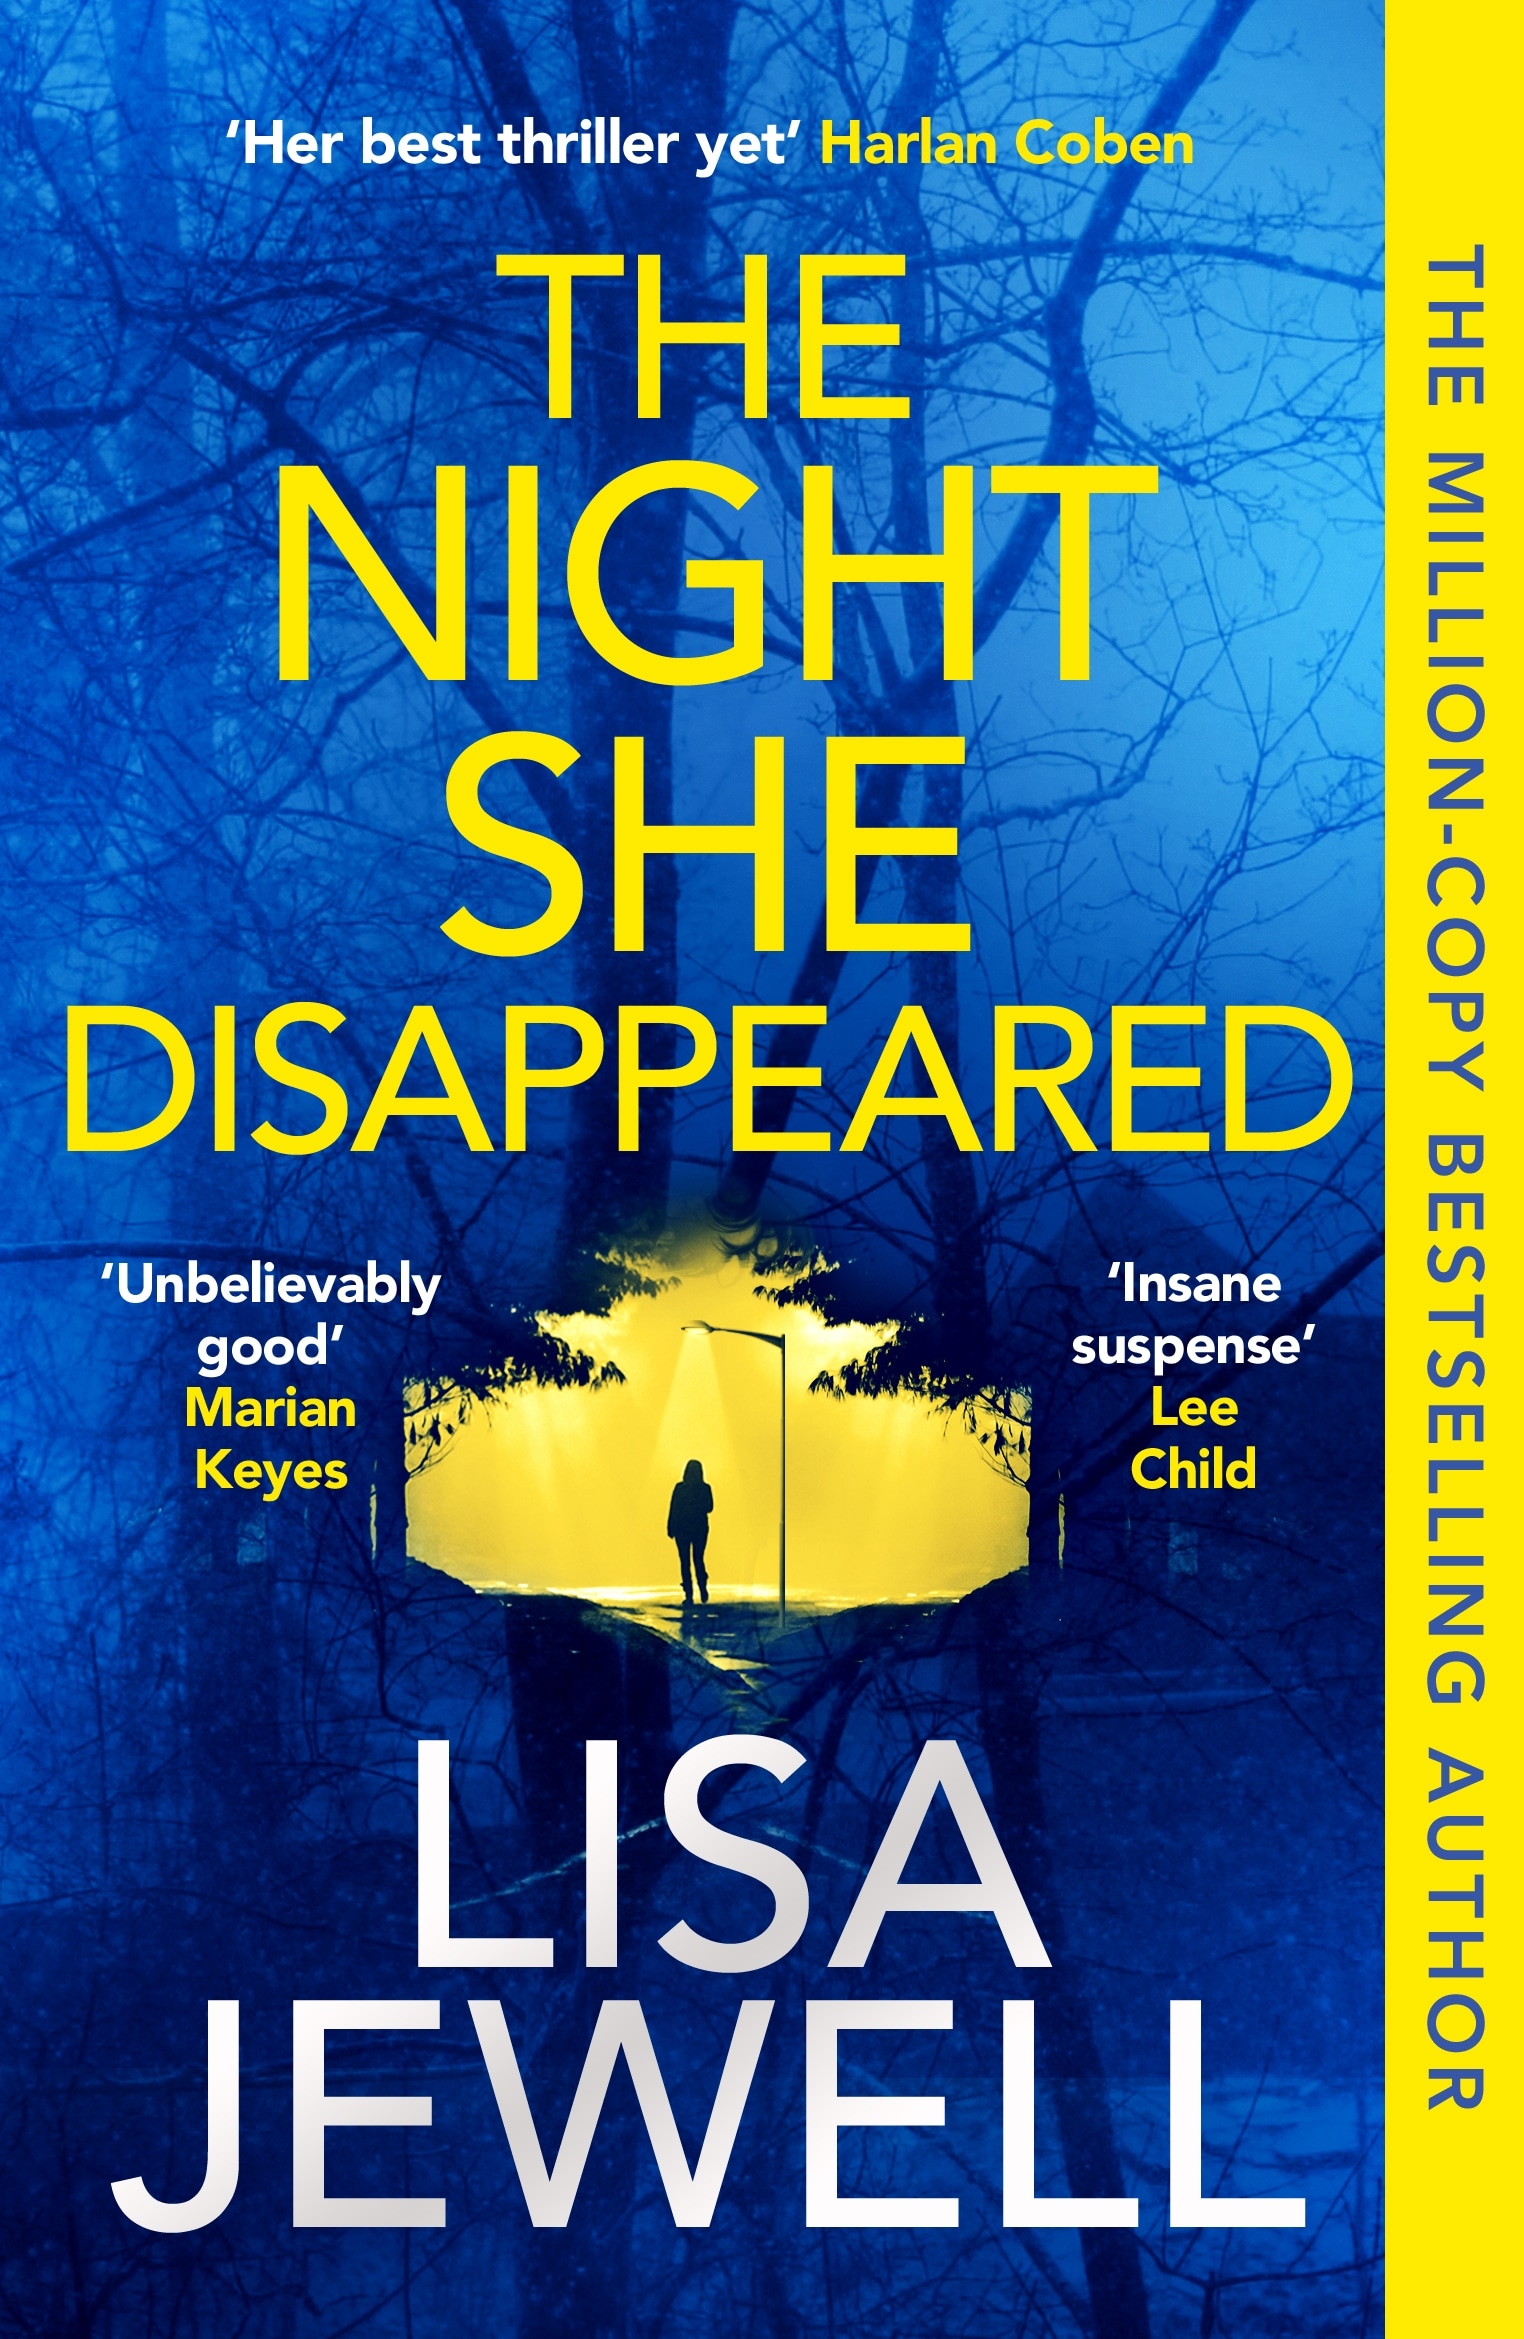 Book “The Night She Disappeared” by Lisa Jewell — December 9, 2021